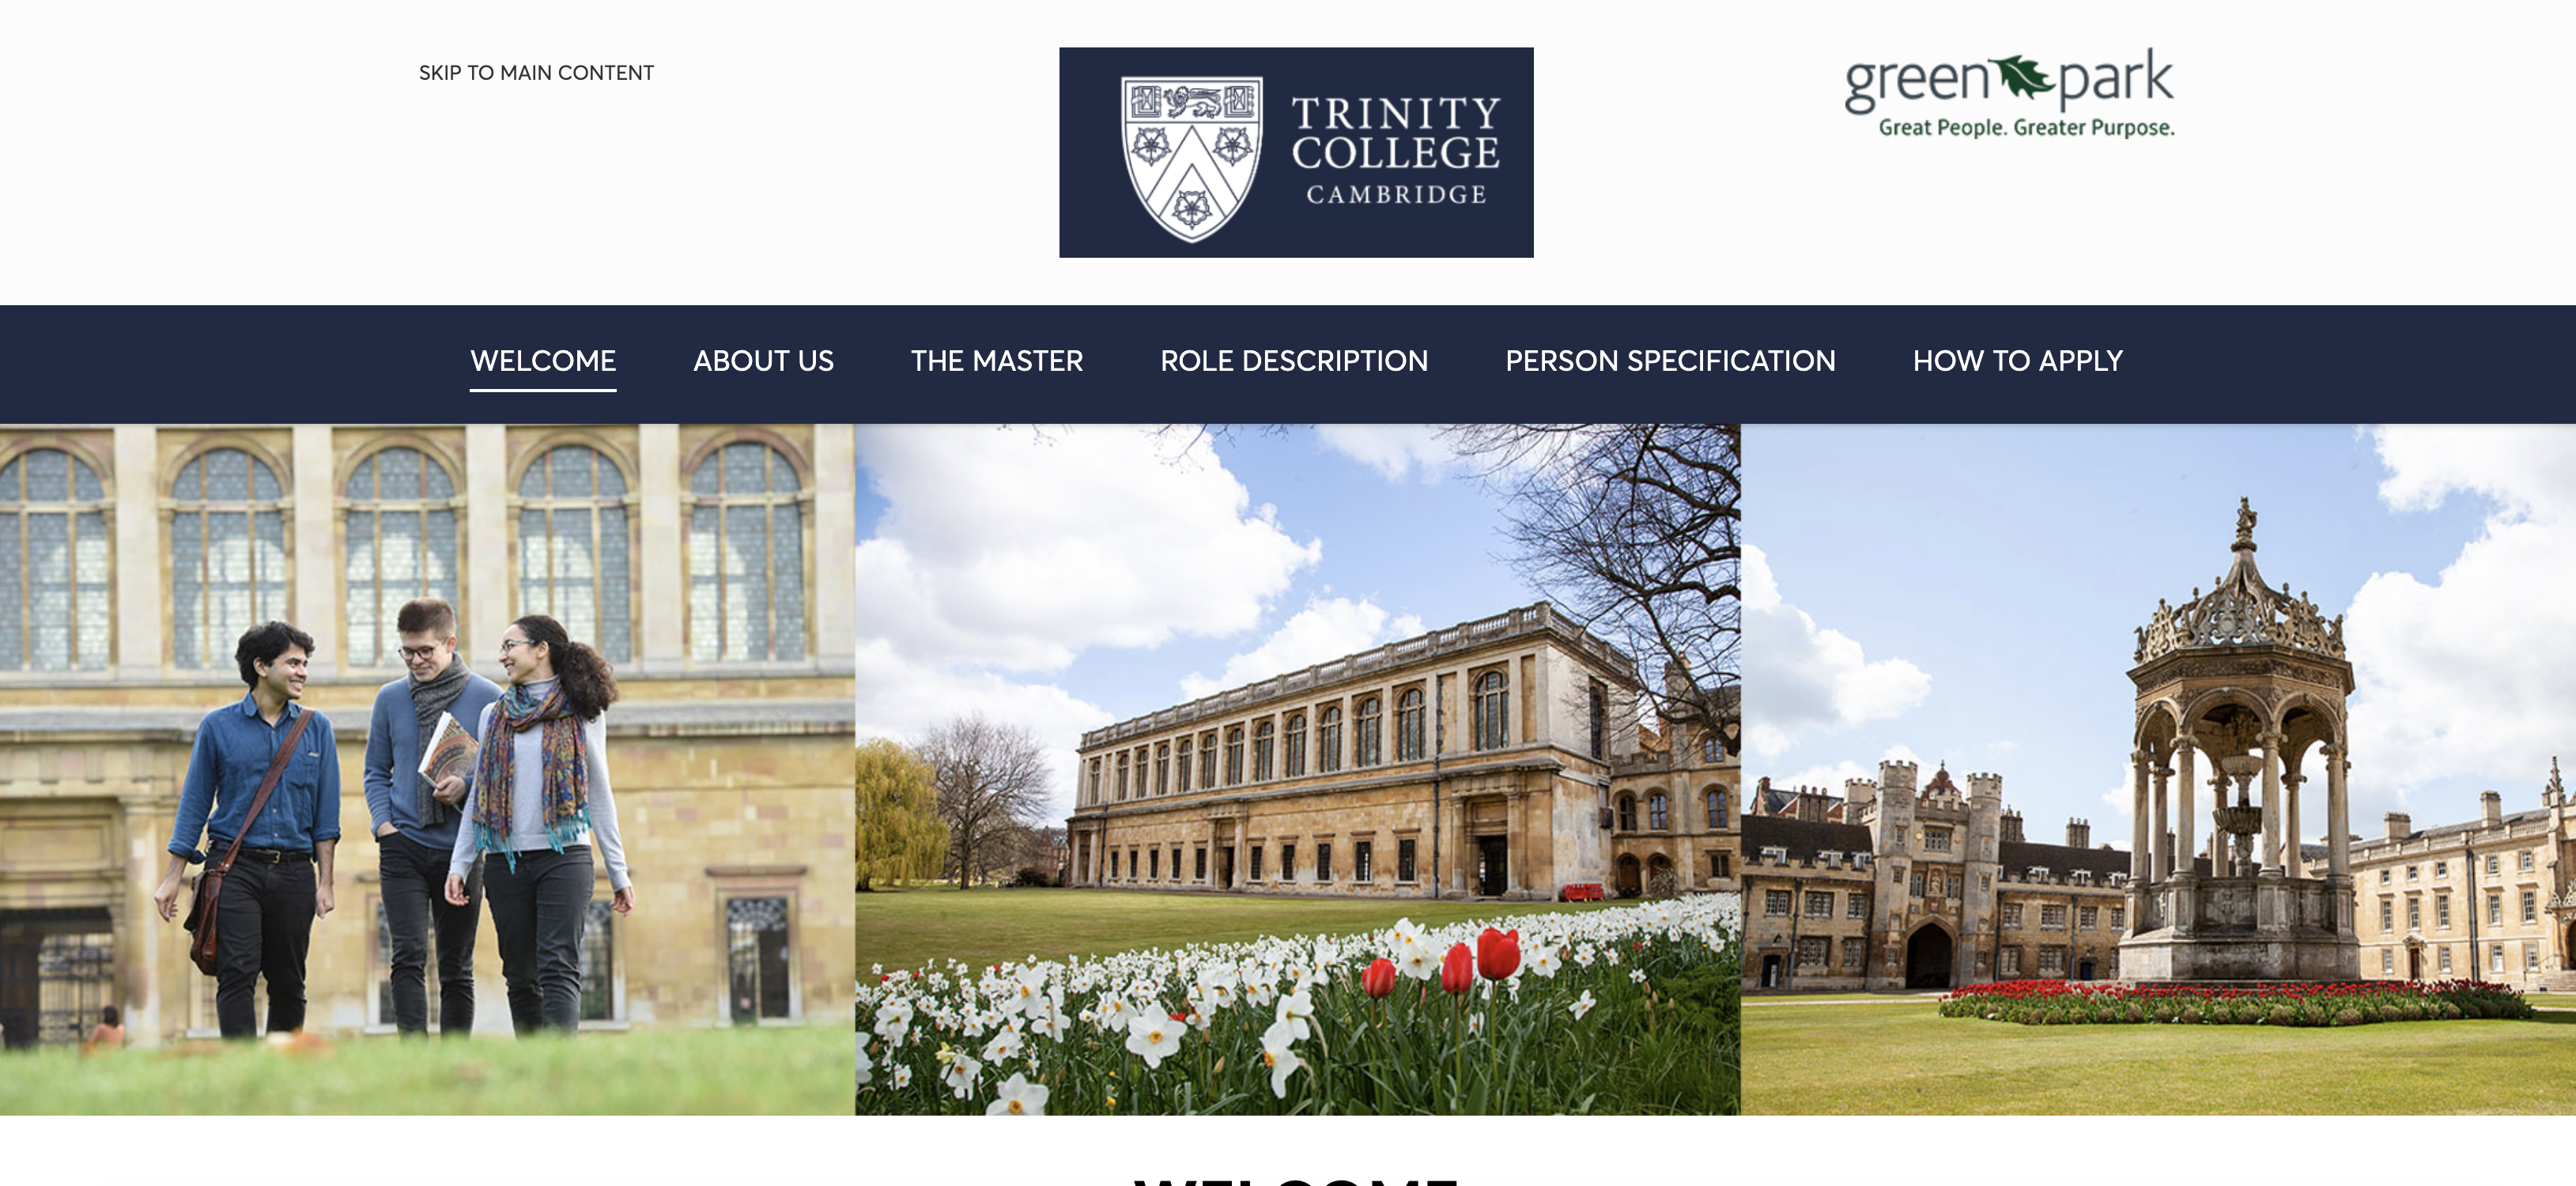 Welcome to Trinity College